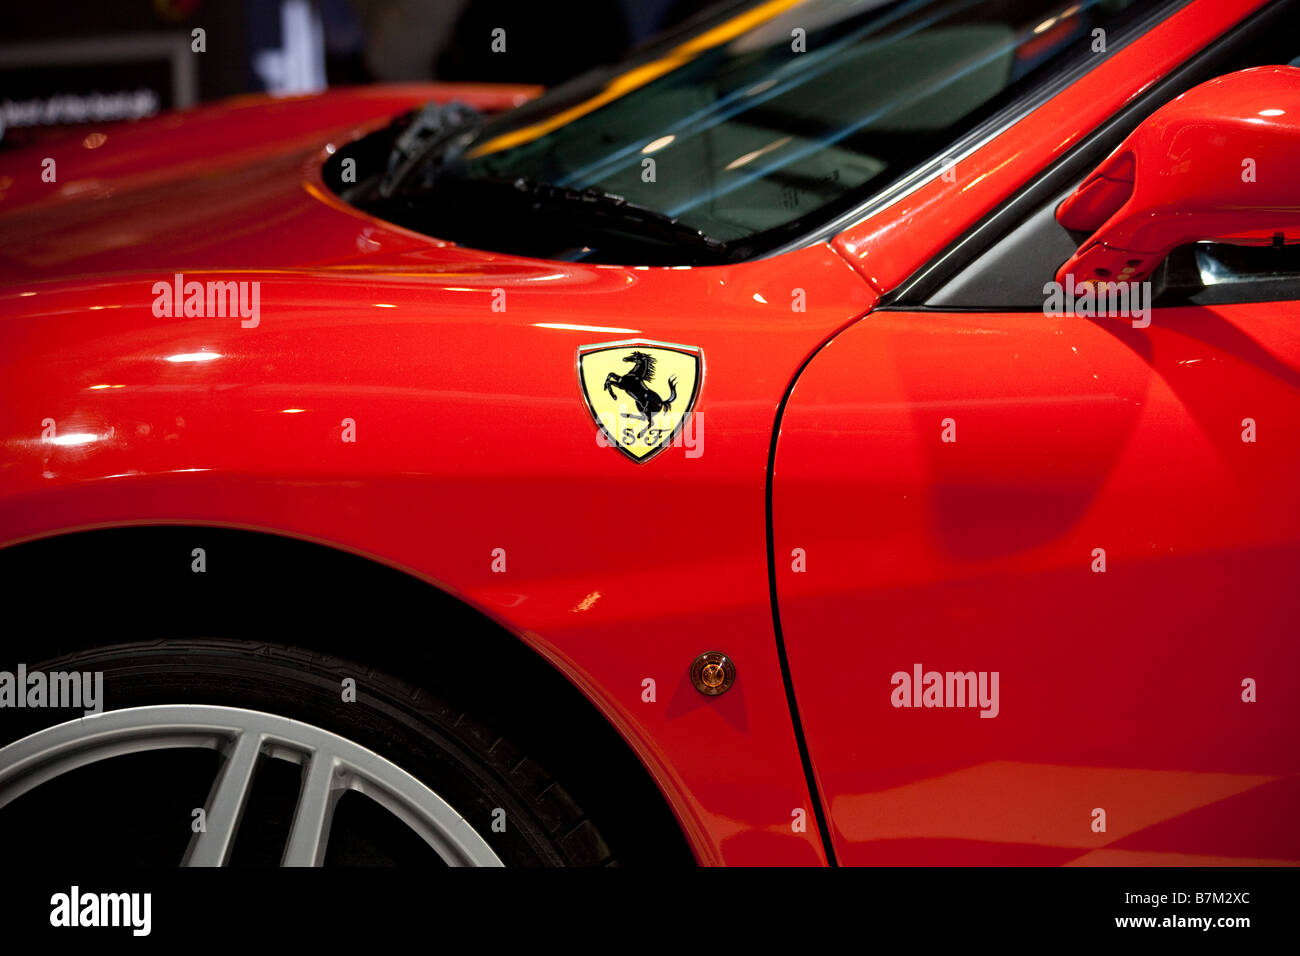 Ferrari F430 sports coupe, detail of side view Stock Photo